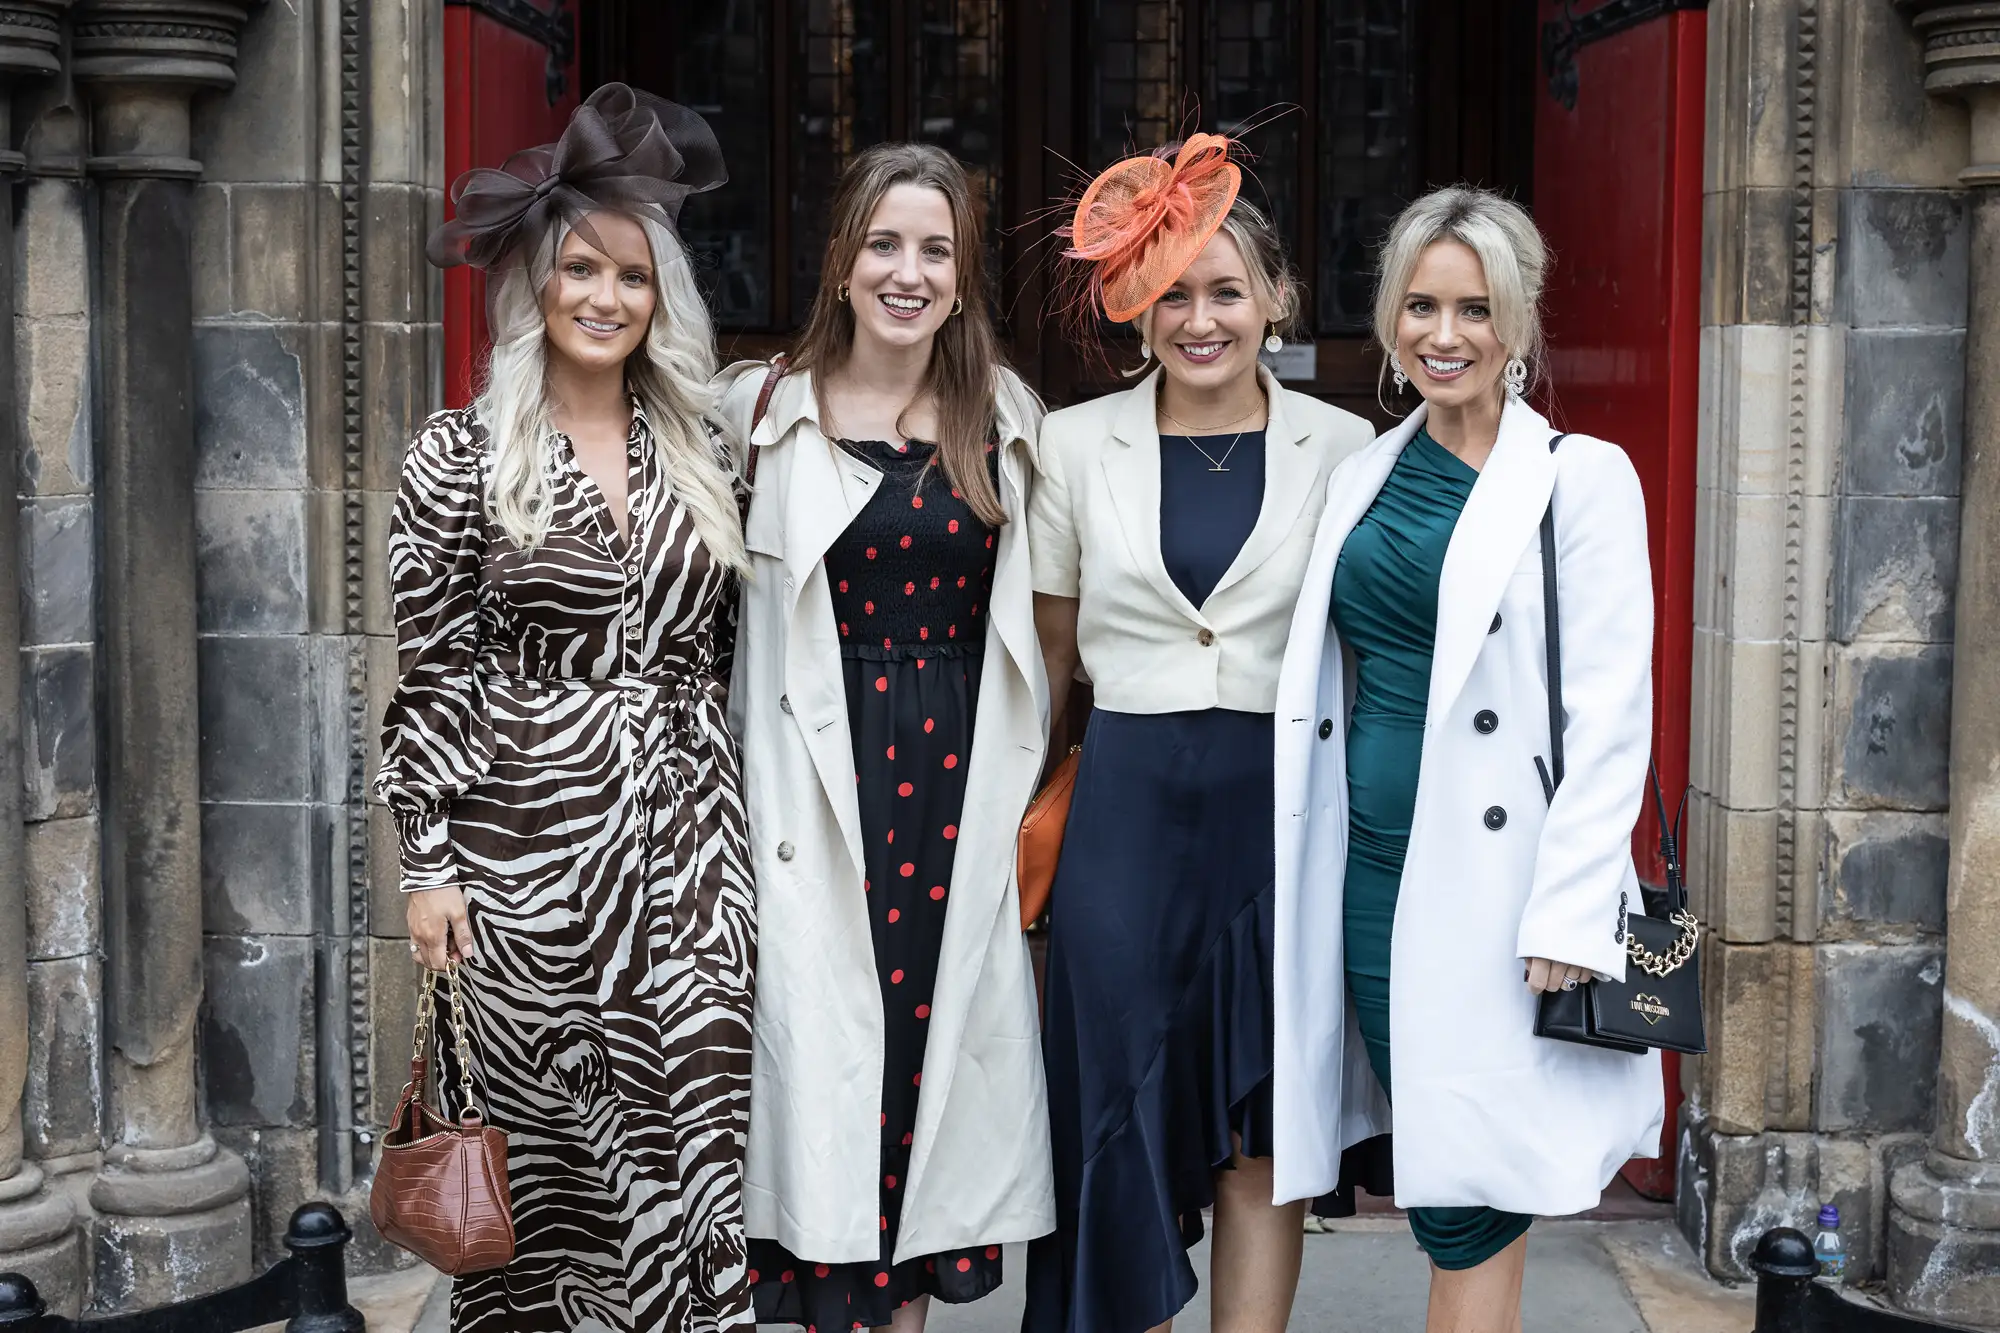 Four women in stylish outfits and colorful hats smiling outside a historic building.